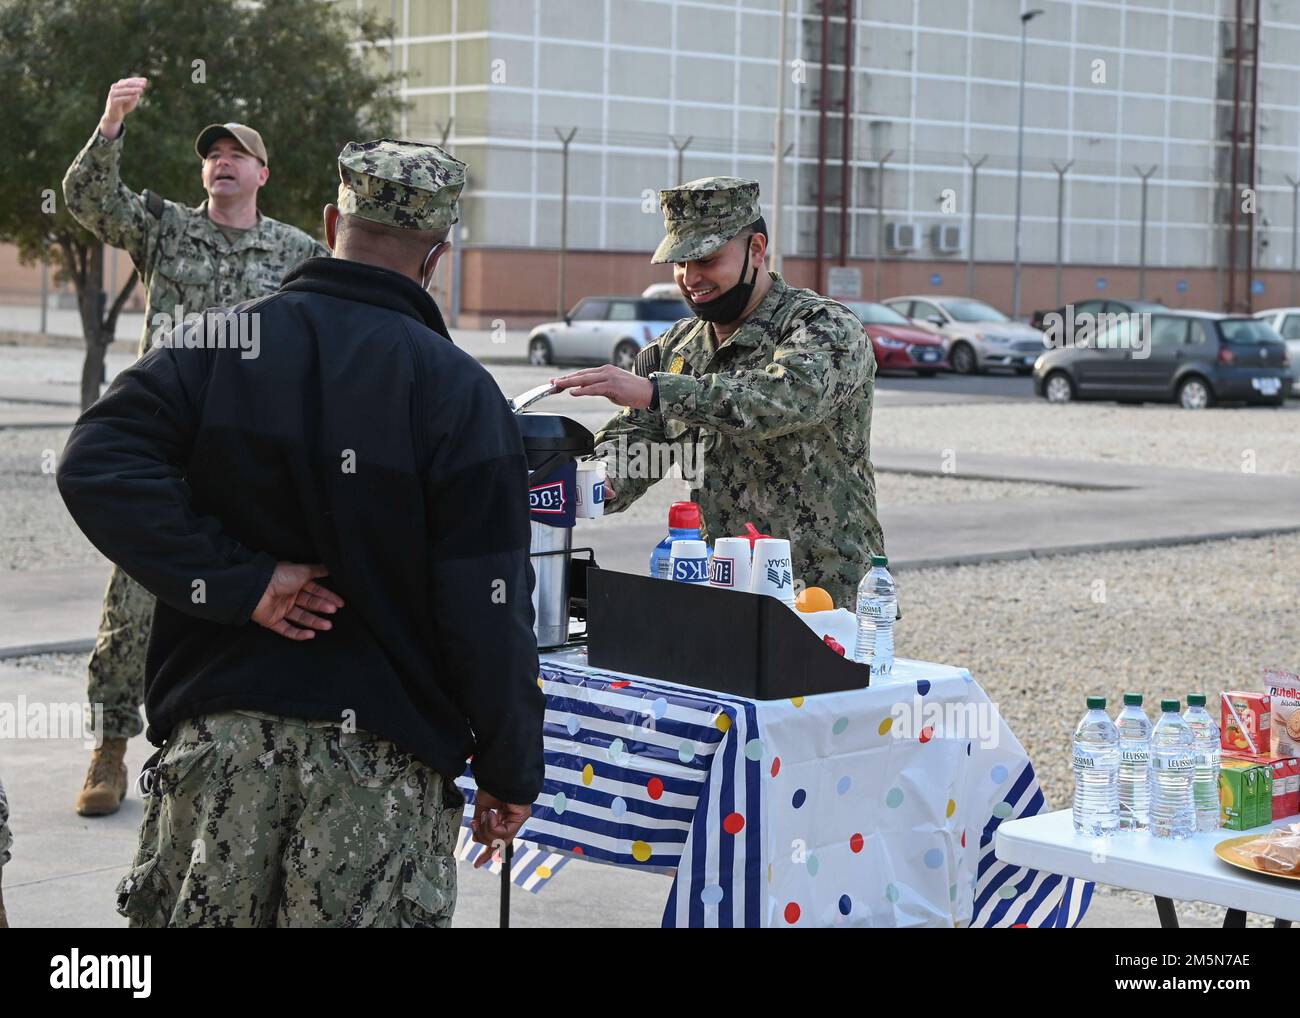 220329-N-GK686-1117 NAVAL AIR STATION SIGONELLA, Italy (Mar. 29, 2022)—Master-at-Arms 1st Class Raul Hernandez receives free coffee from U.S. Navy chiefs in honor of the upcoming Chief’s Birthday on Naval Air Station Sigonella, Mar. 29, 2022. NAS Sigonella’s strategic location enables U.S., allied, and partner nation forces to deploy and respond as required, ensuring security and stability in Europe, Africa and Central Command. Stock Photo